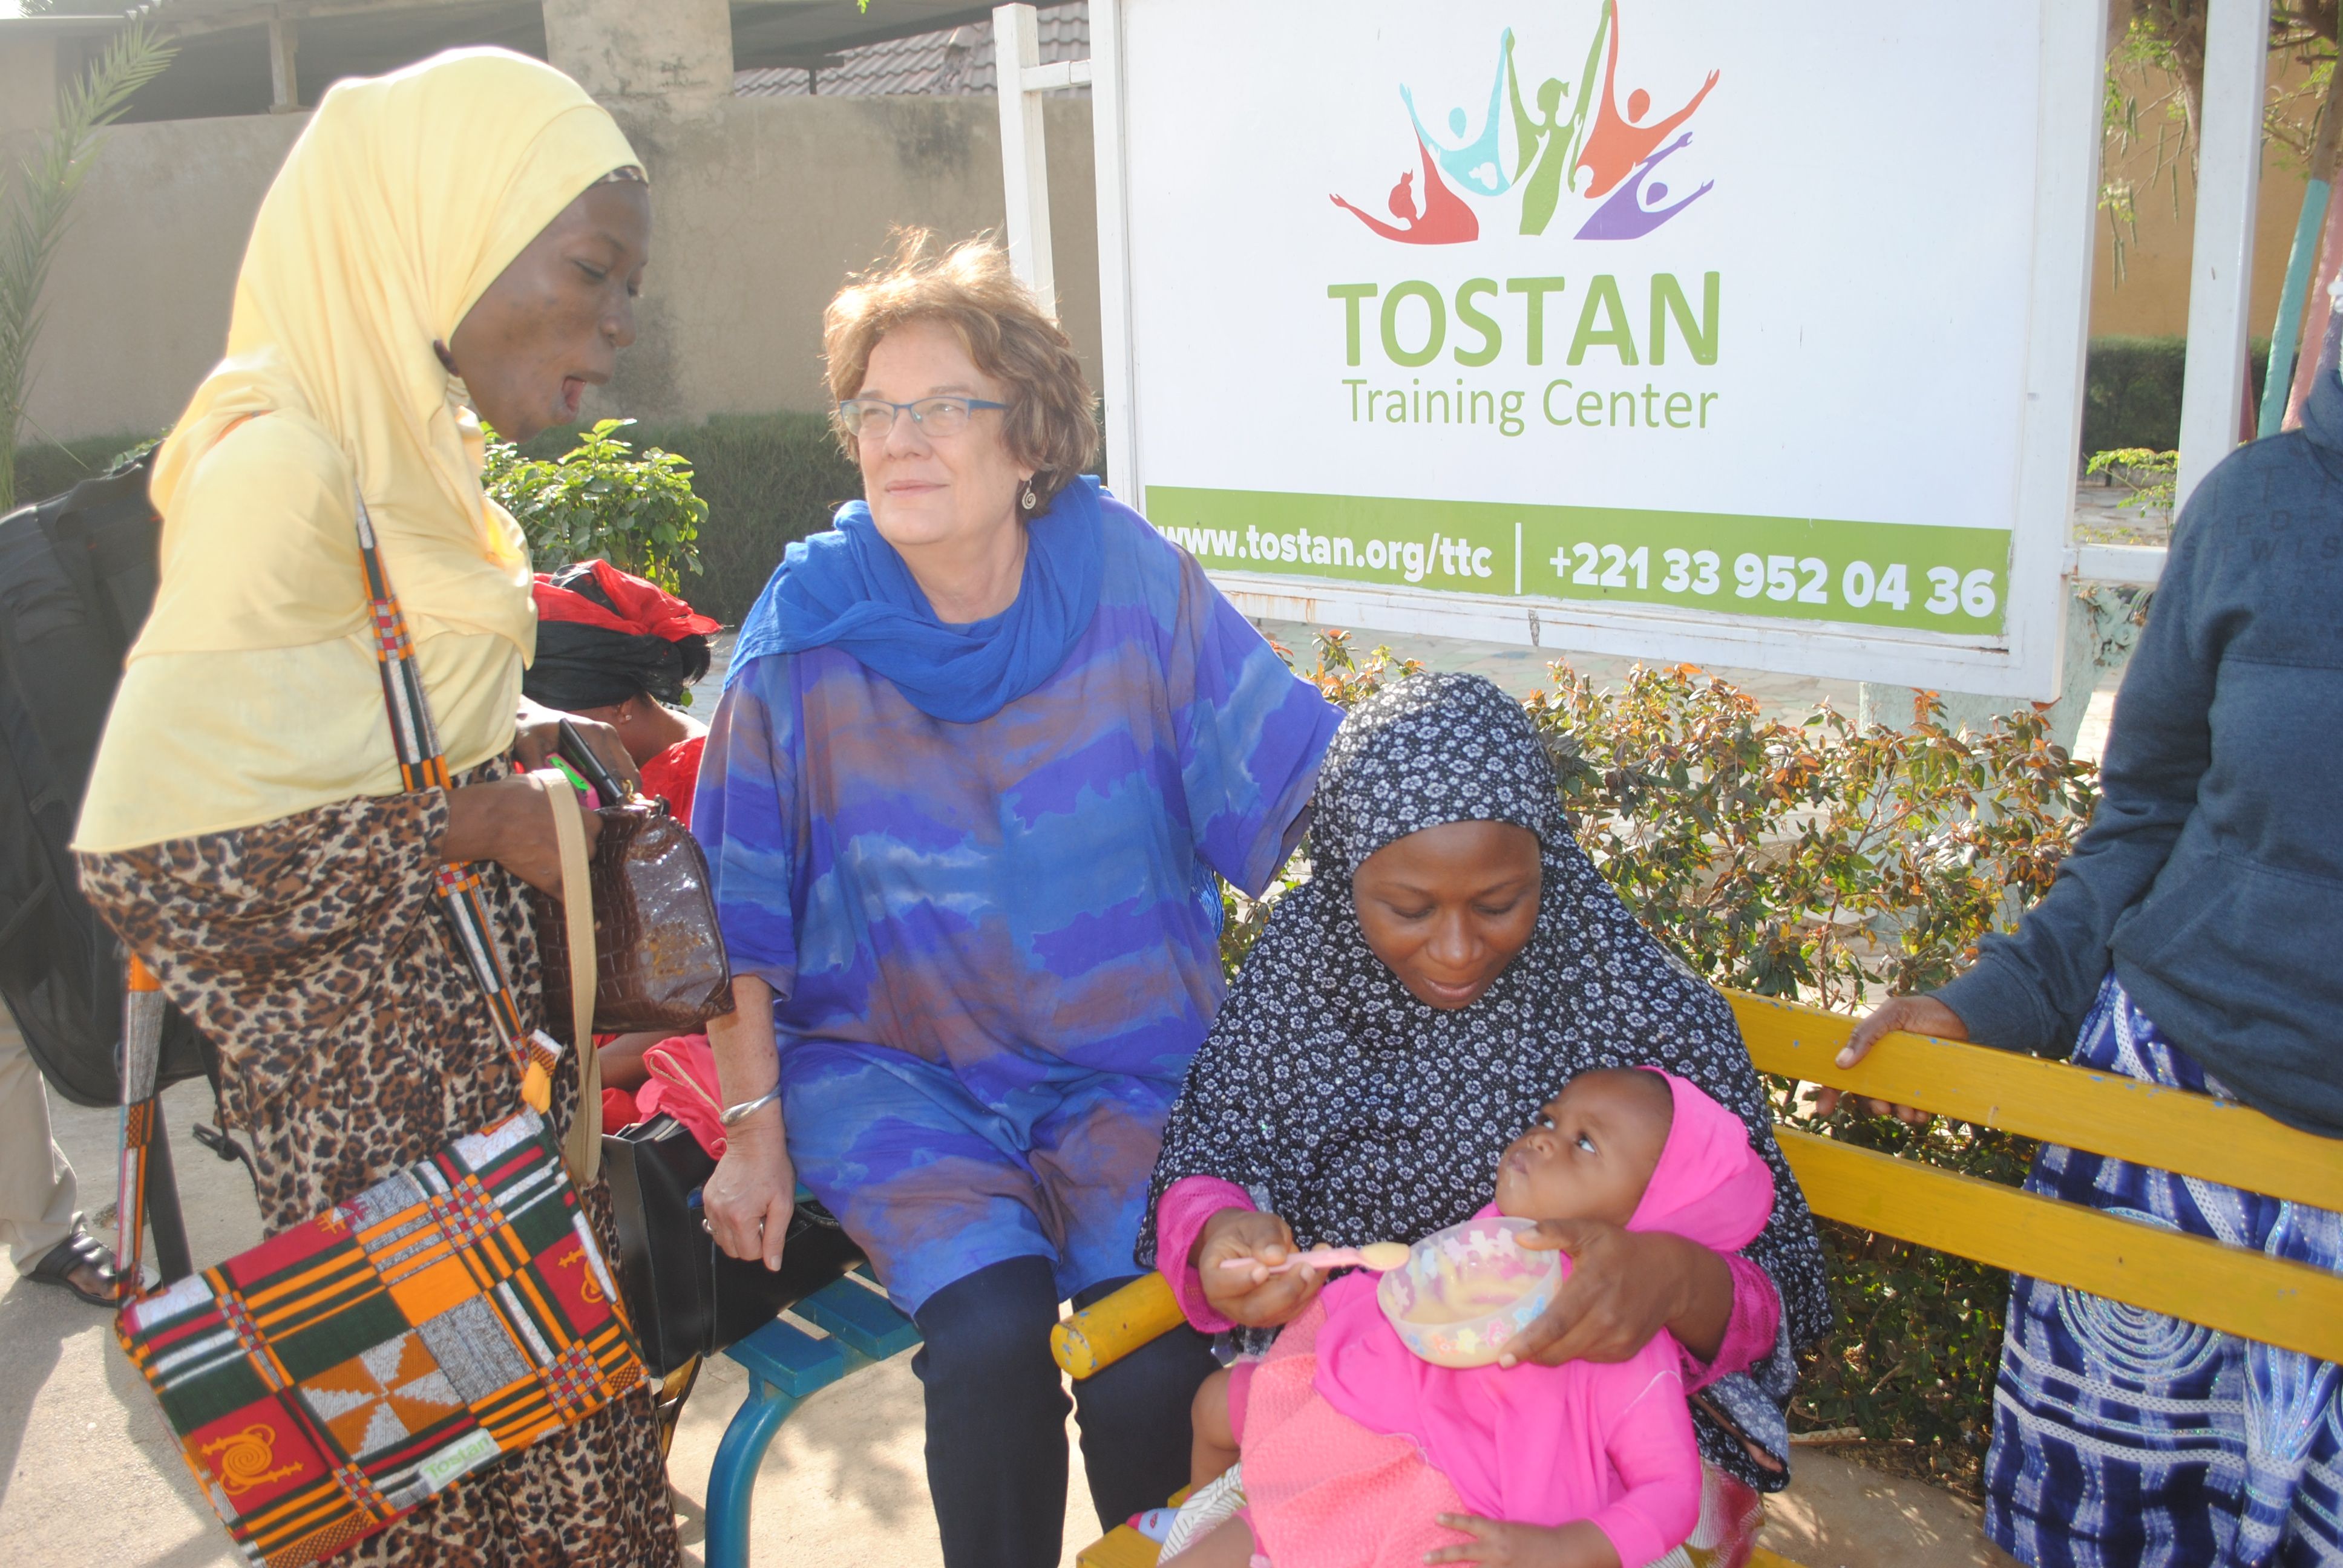 Molly Melching, founder of Tostan, a nonprofit based in Senegal, with participants from a workshop for religious and community leaders from Ghana and Nigeria. Image by Amy Yee. Senegal, 2017.